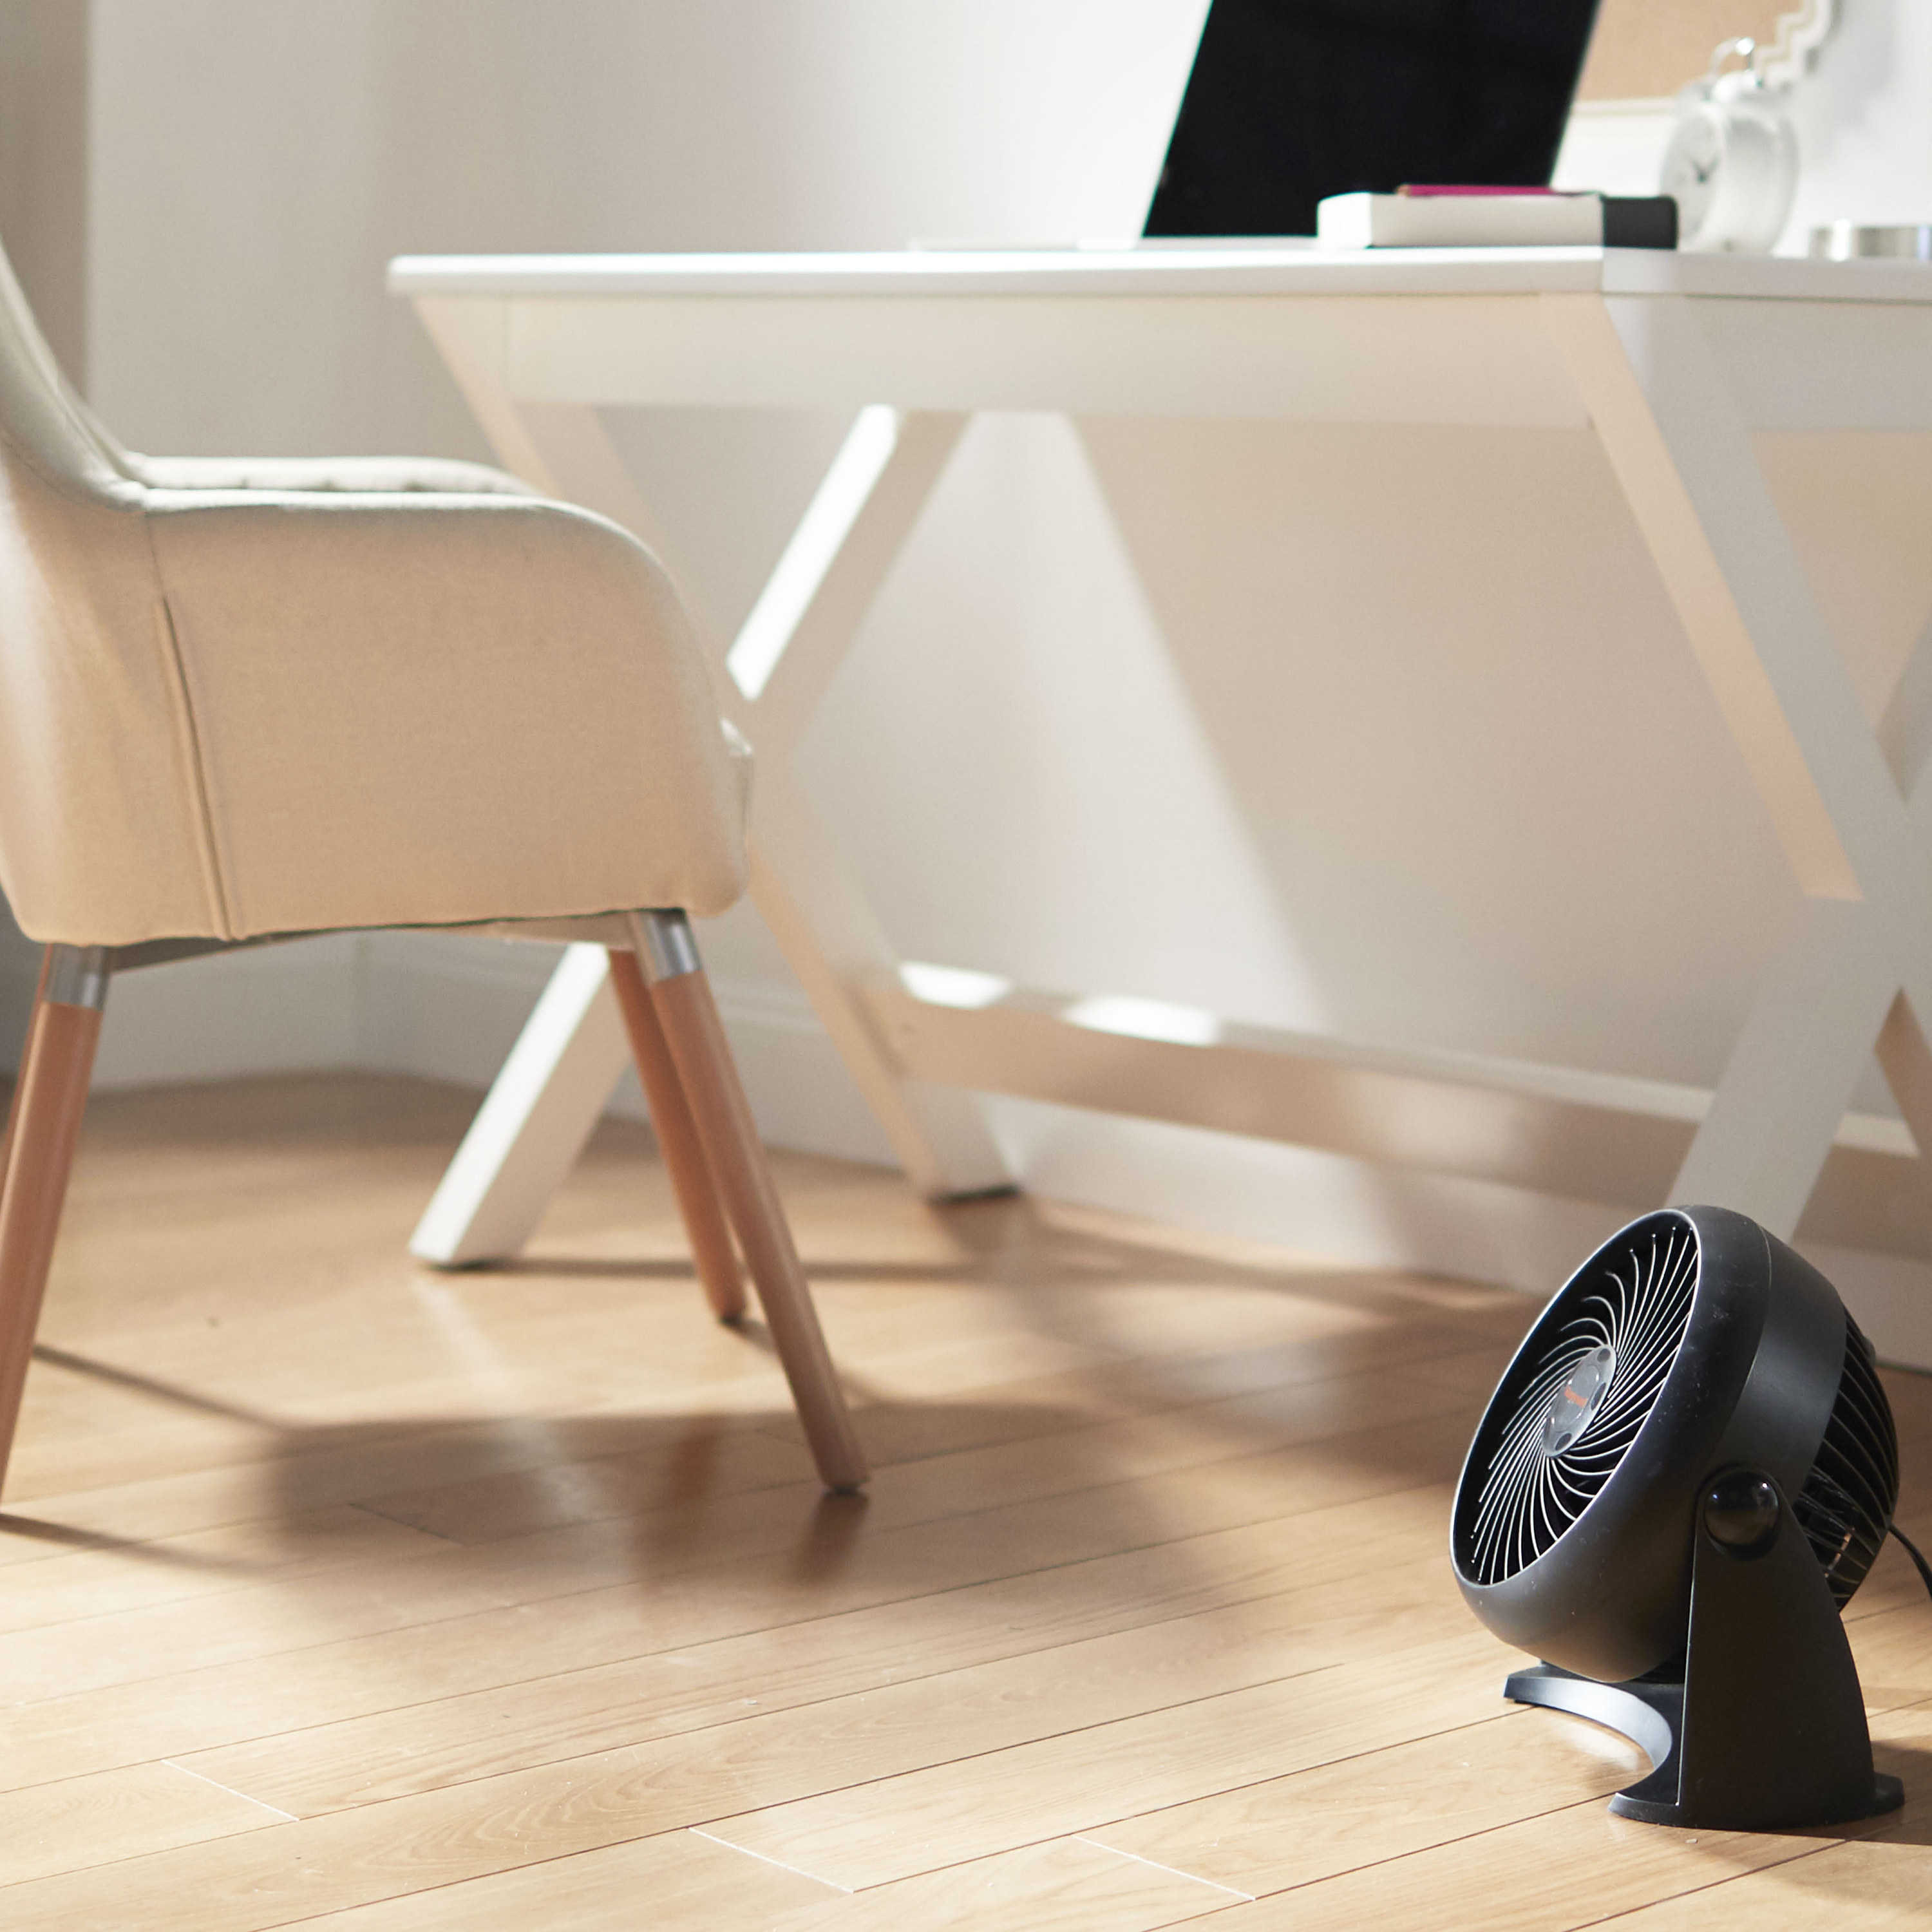 The black fan in a home office setting with white furniture